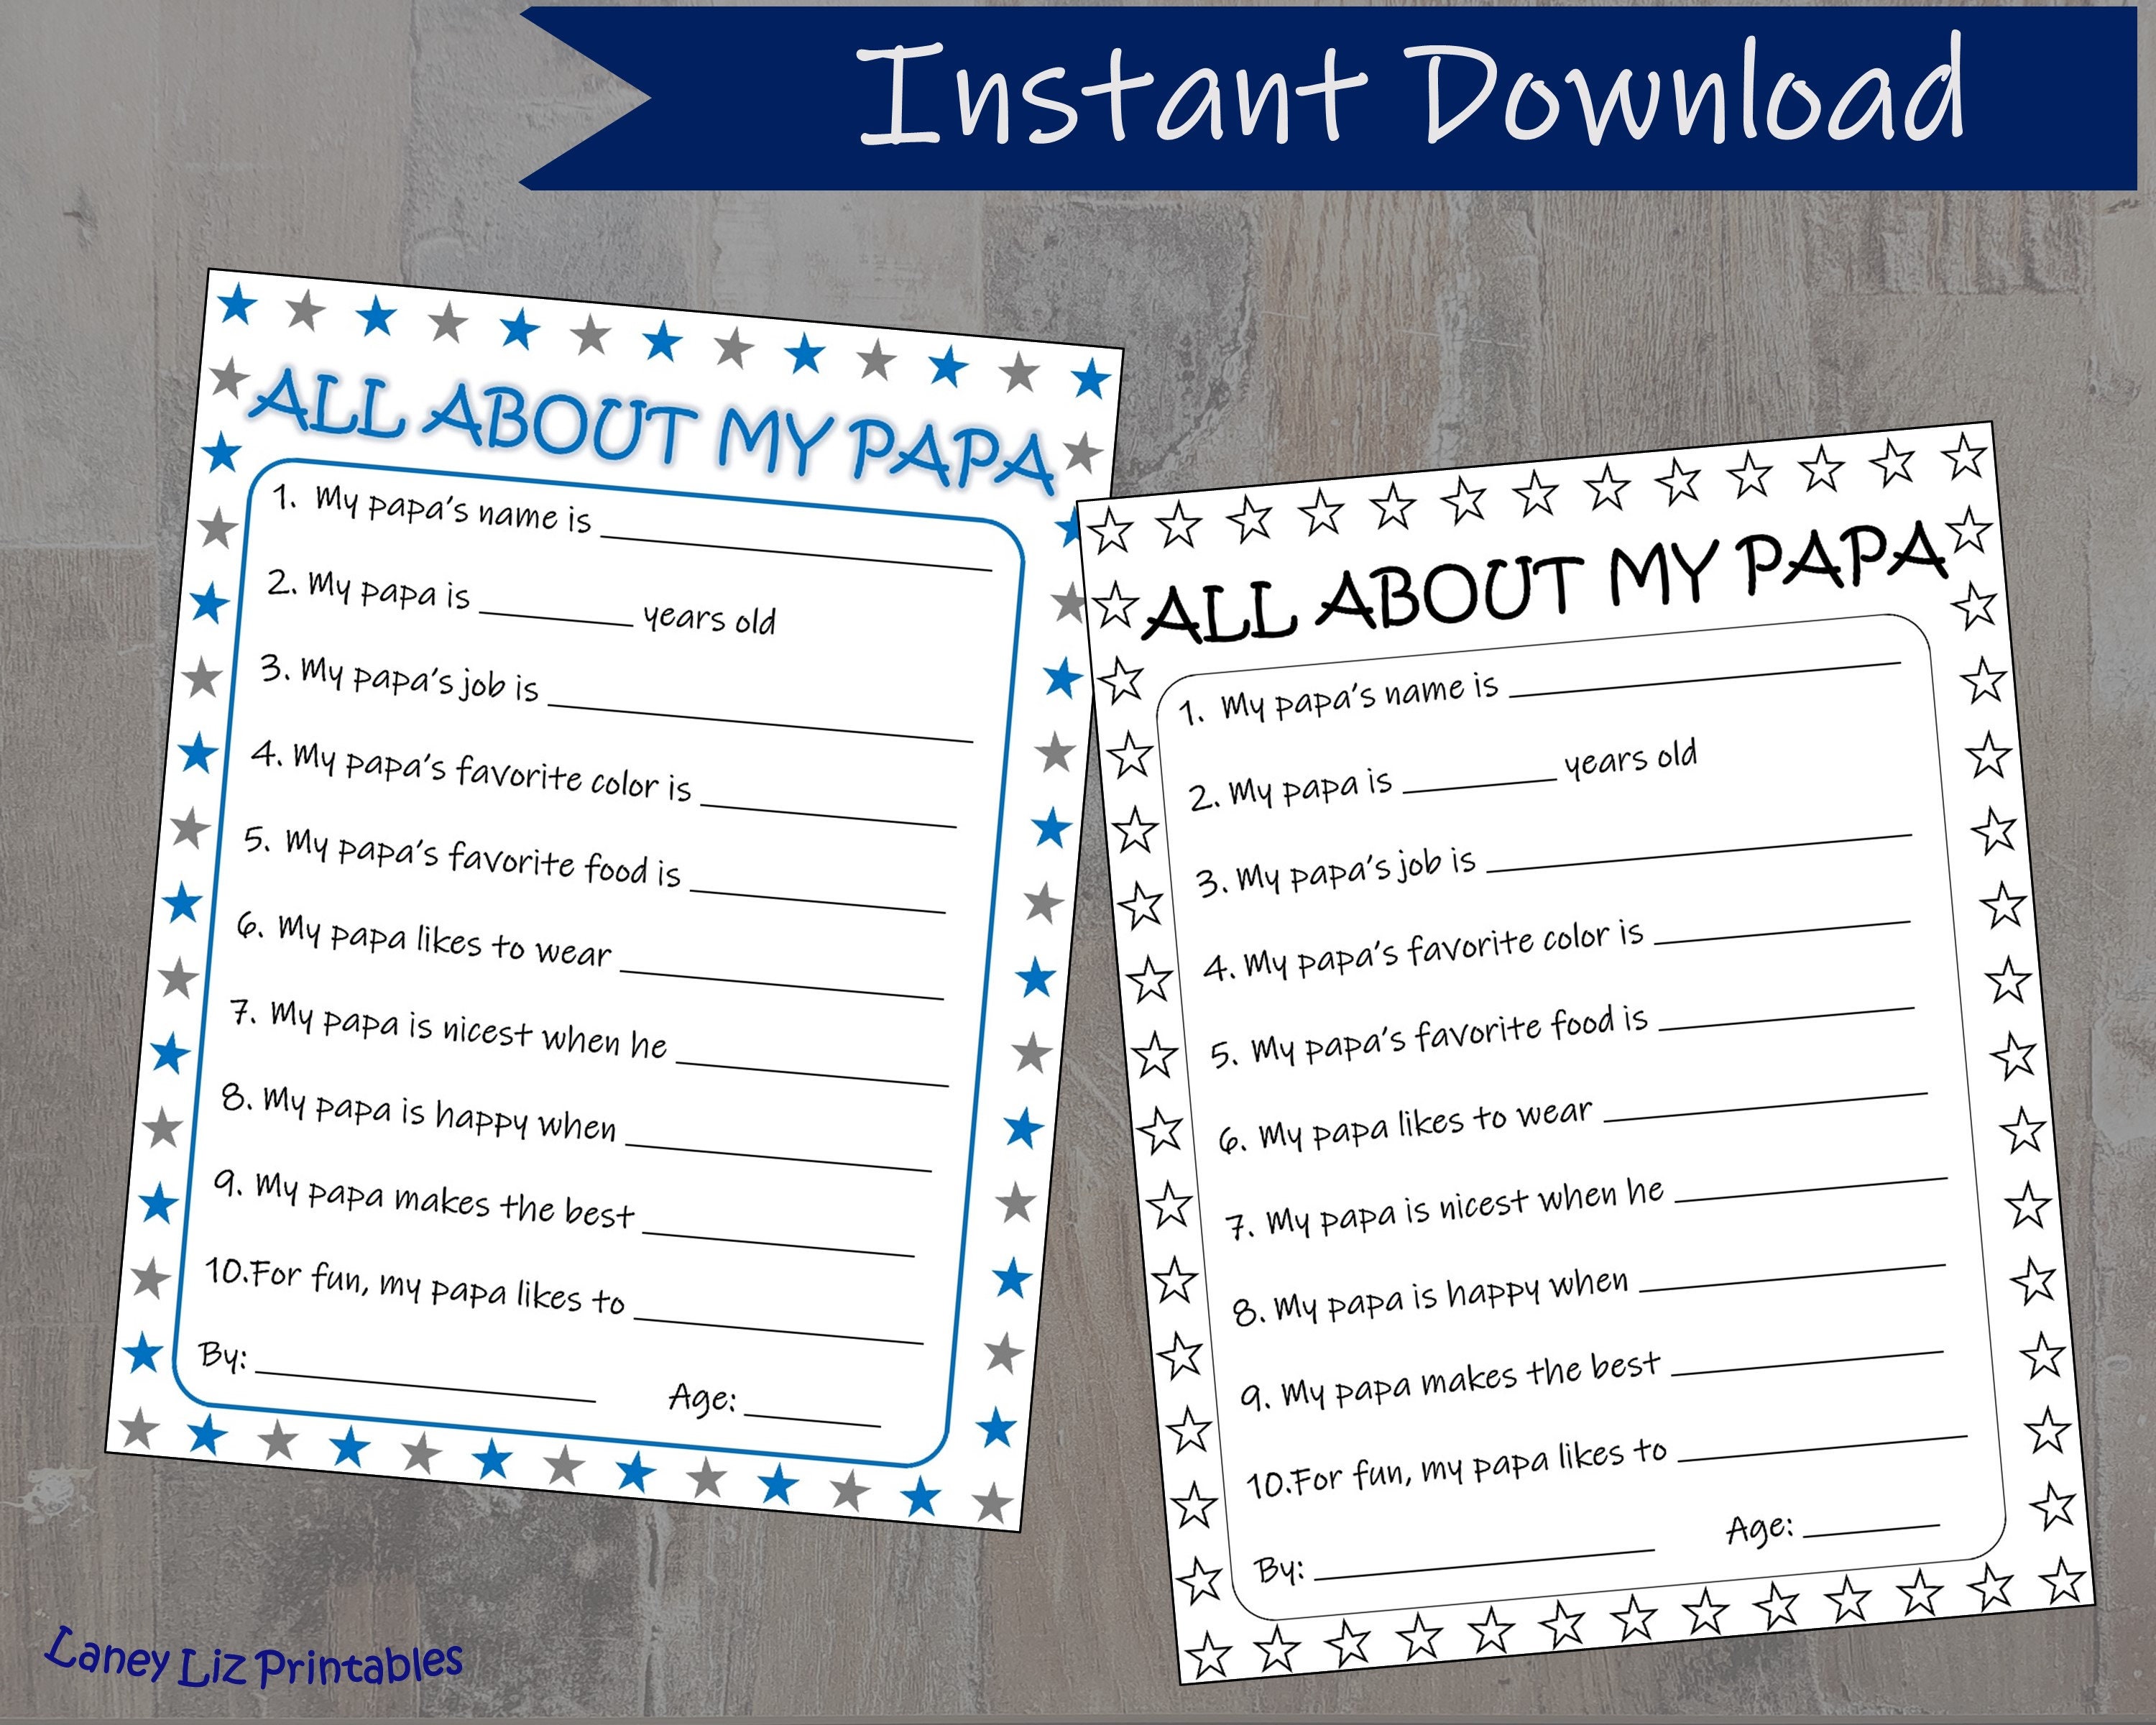 all-about-my-papa-printable-father-s-day-questionnaire-etsy